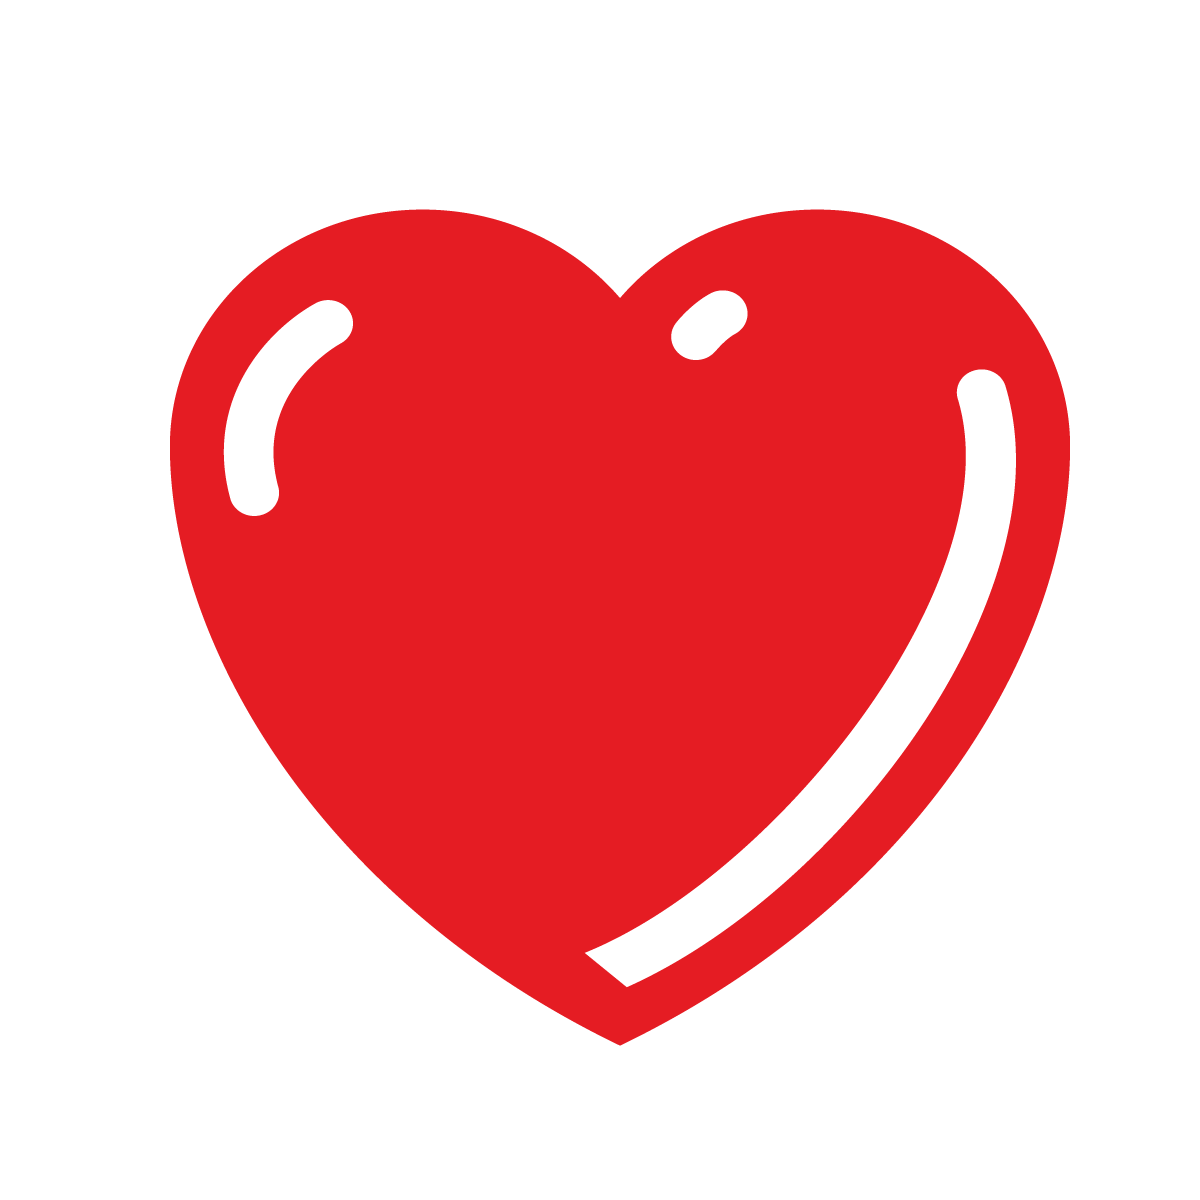 Red Heart PNG Image Transparent - Heart Png